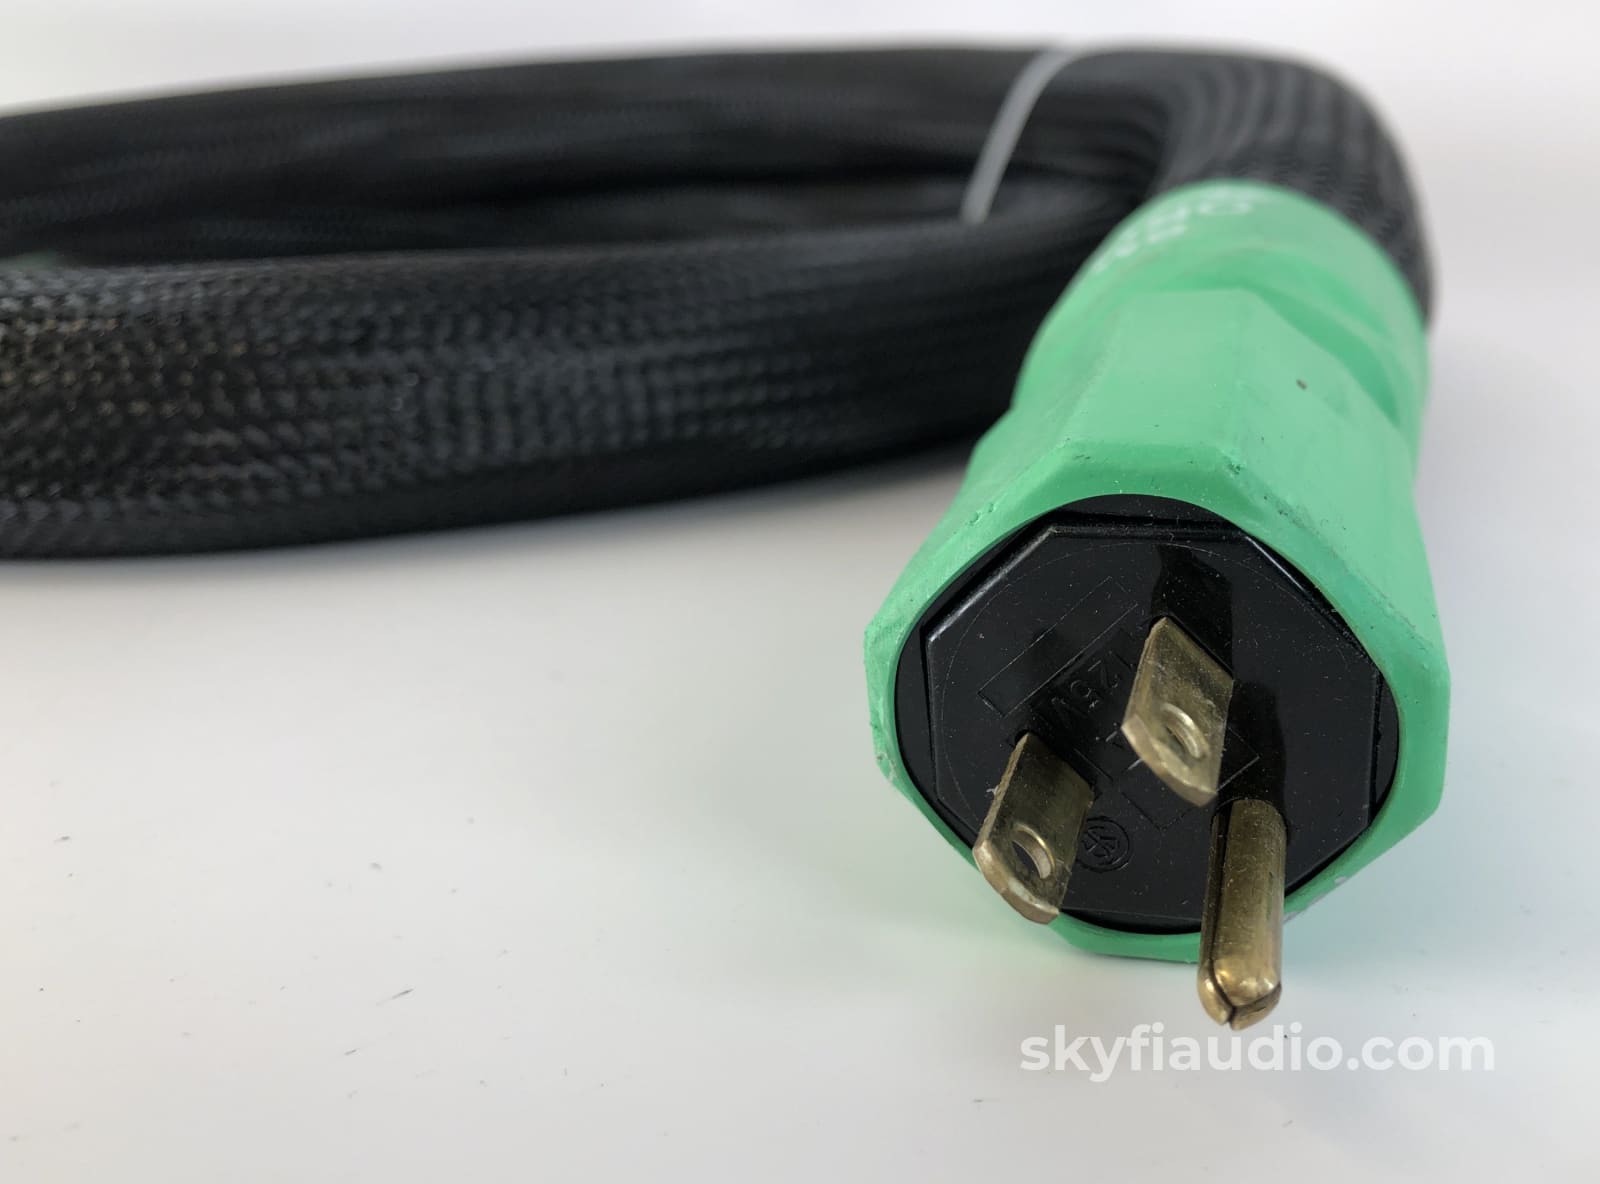 Bmi Orca Limited Power Cable - 1M Cables